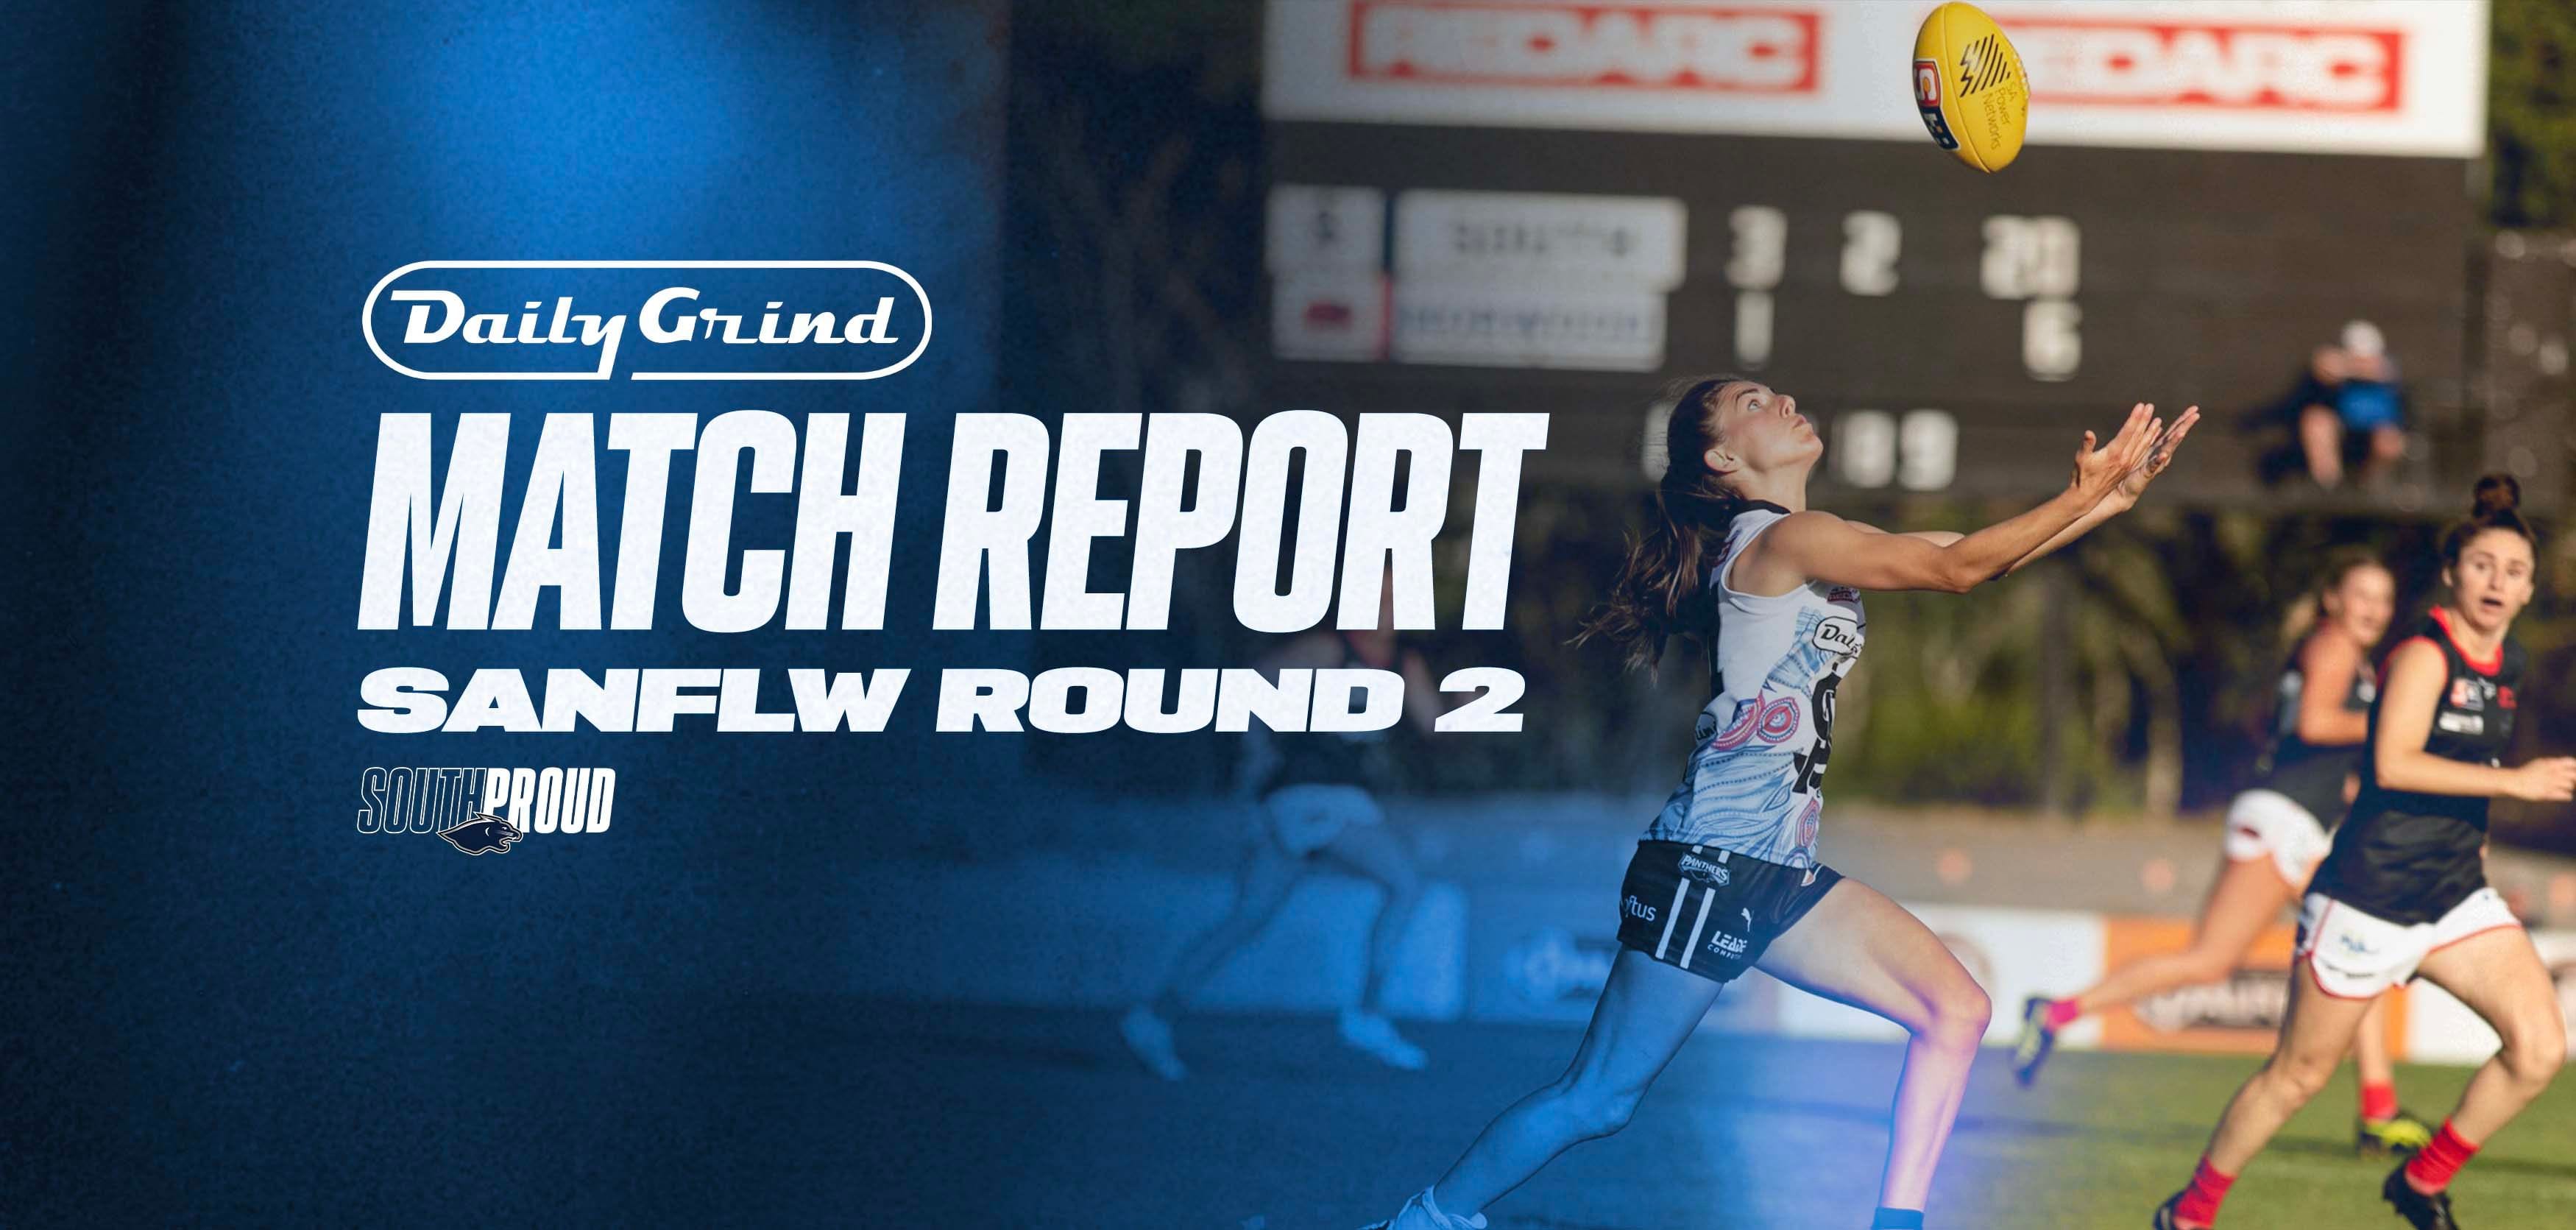 Daily Grind Match Report: Round 2 vs Norwood